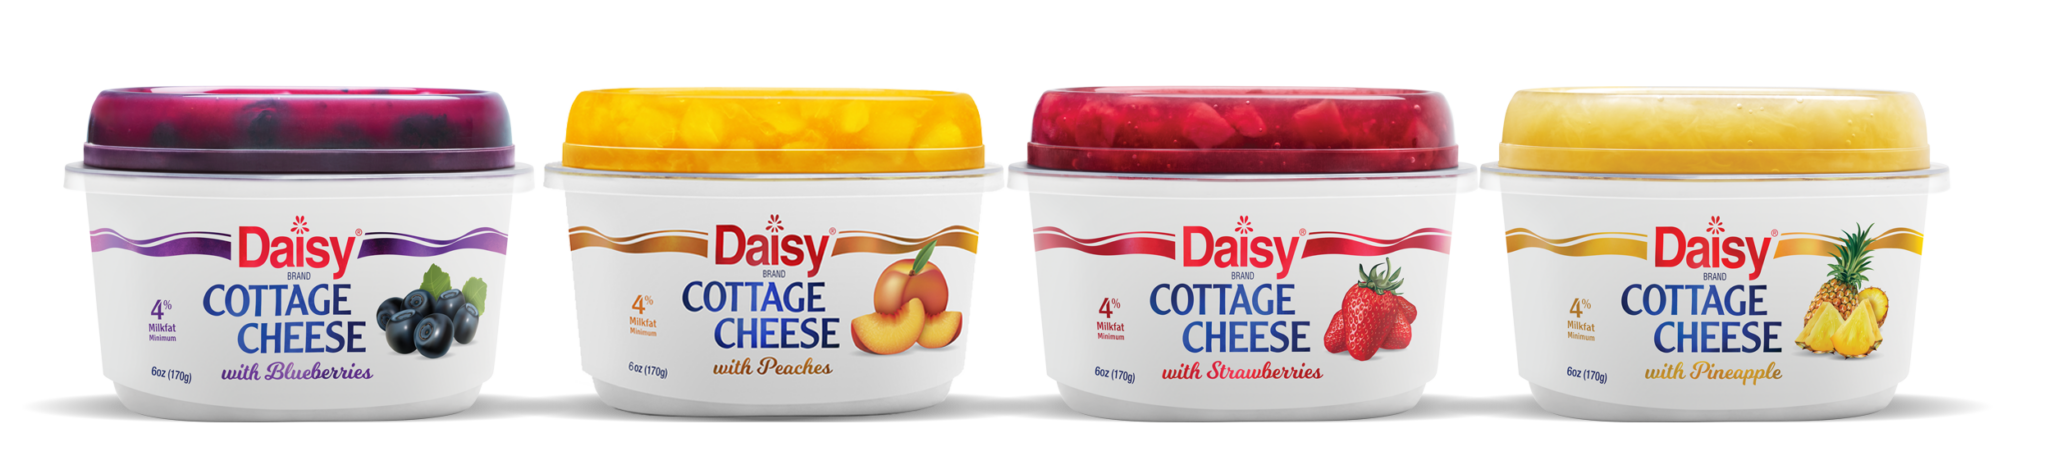 Cottage Cheese Daisy Brand Sour Cream Cottage Cheese